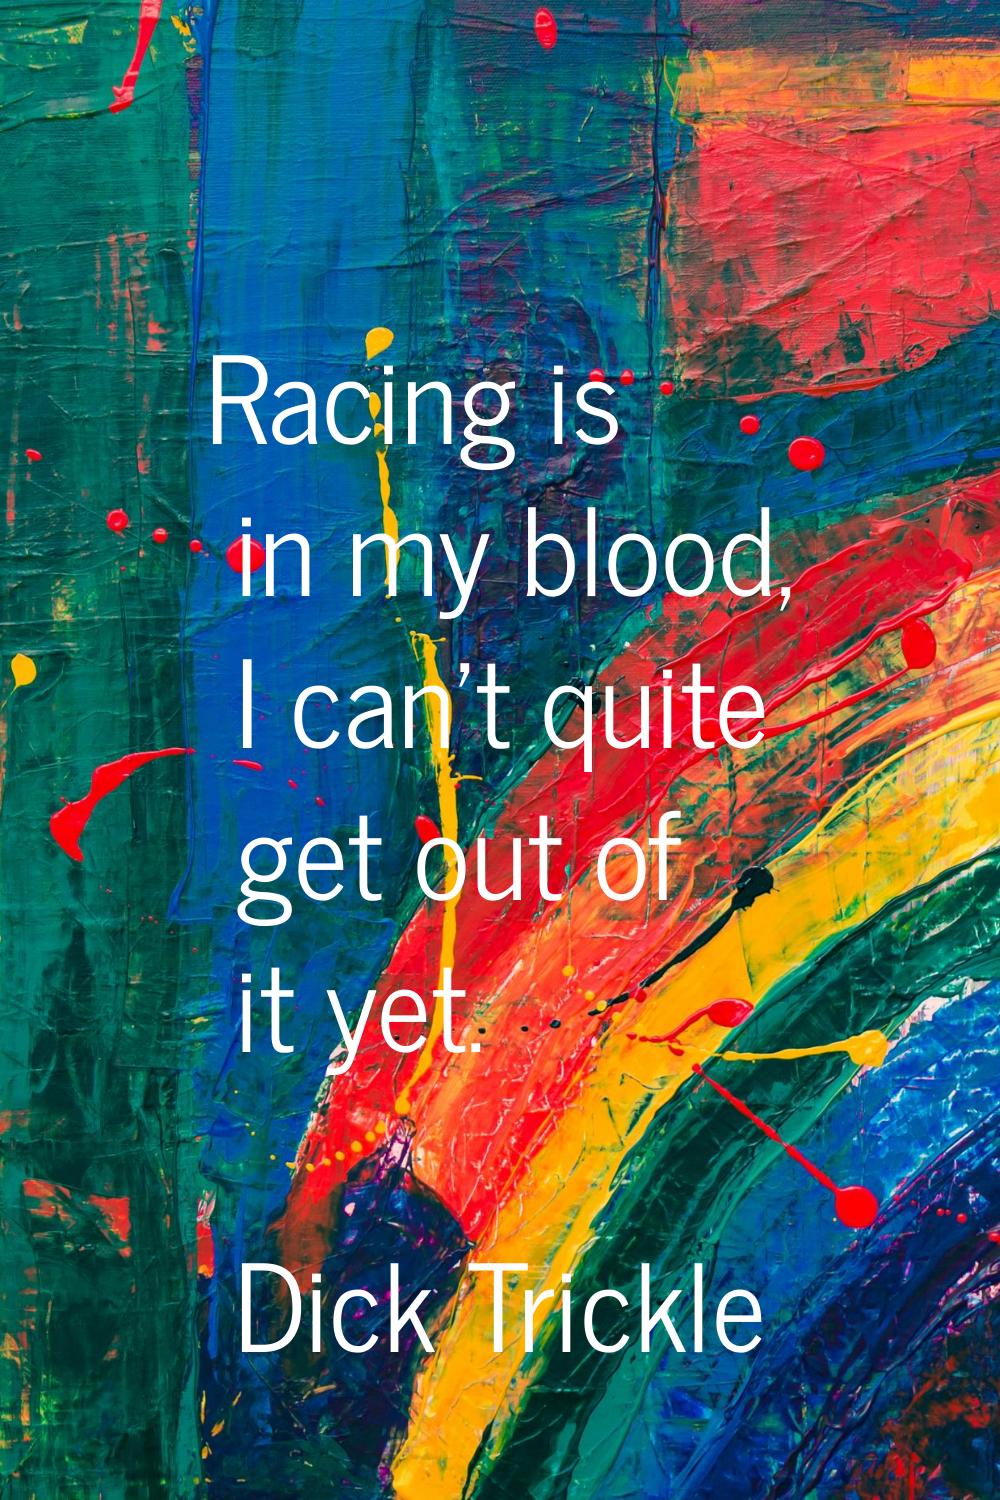 Racing is in my blood, I can't quite get out of it yet.